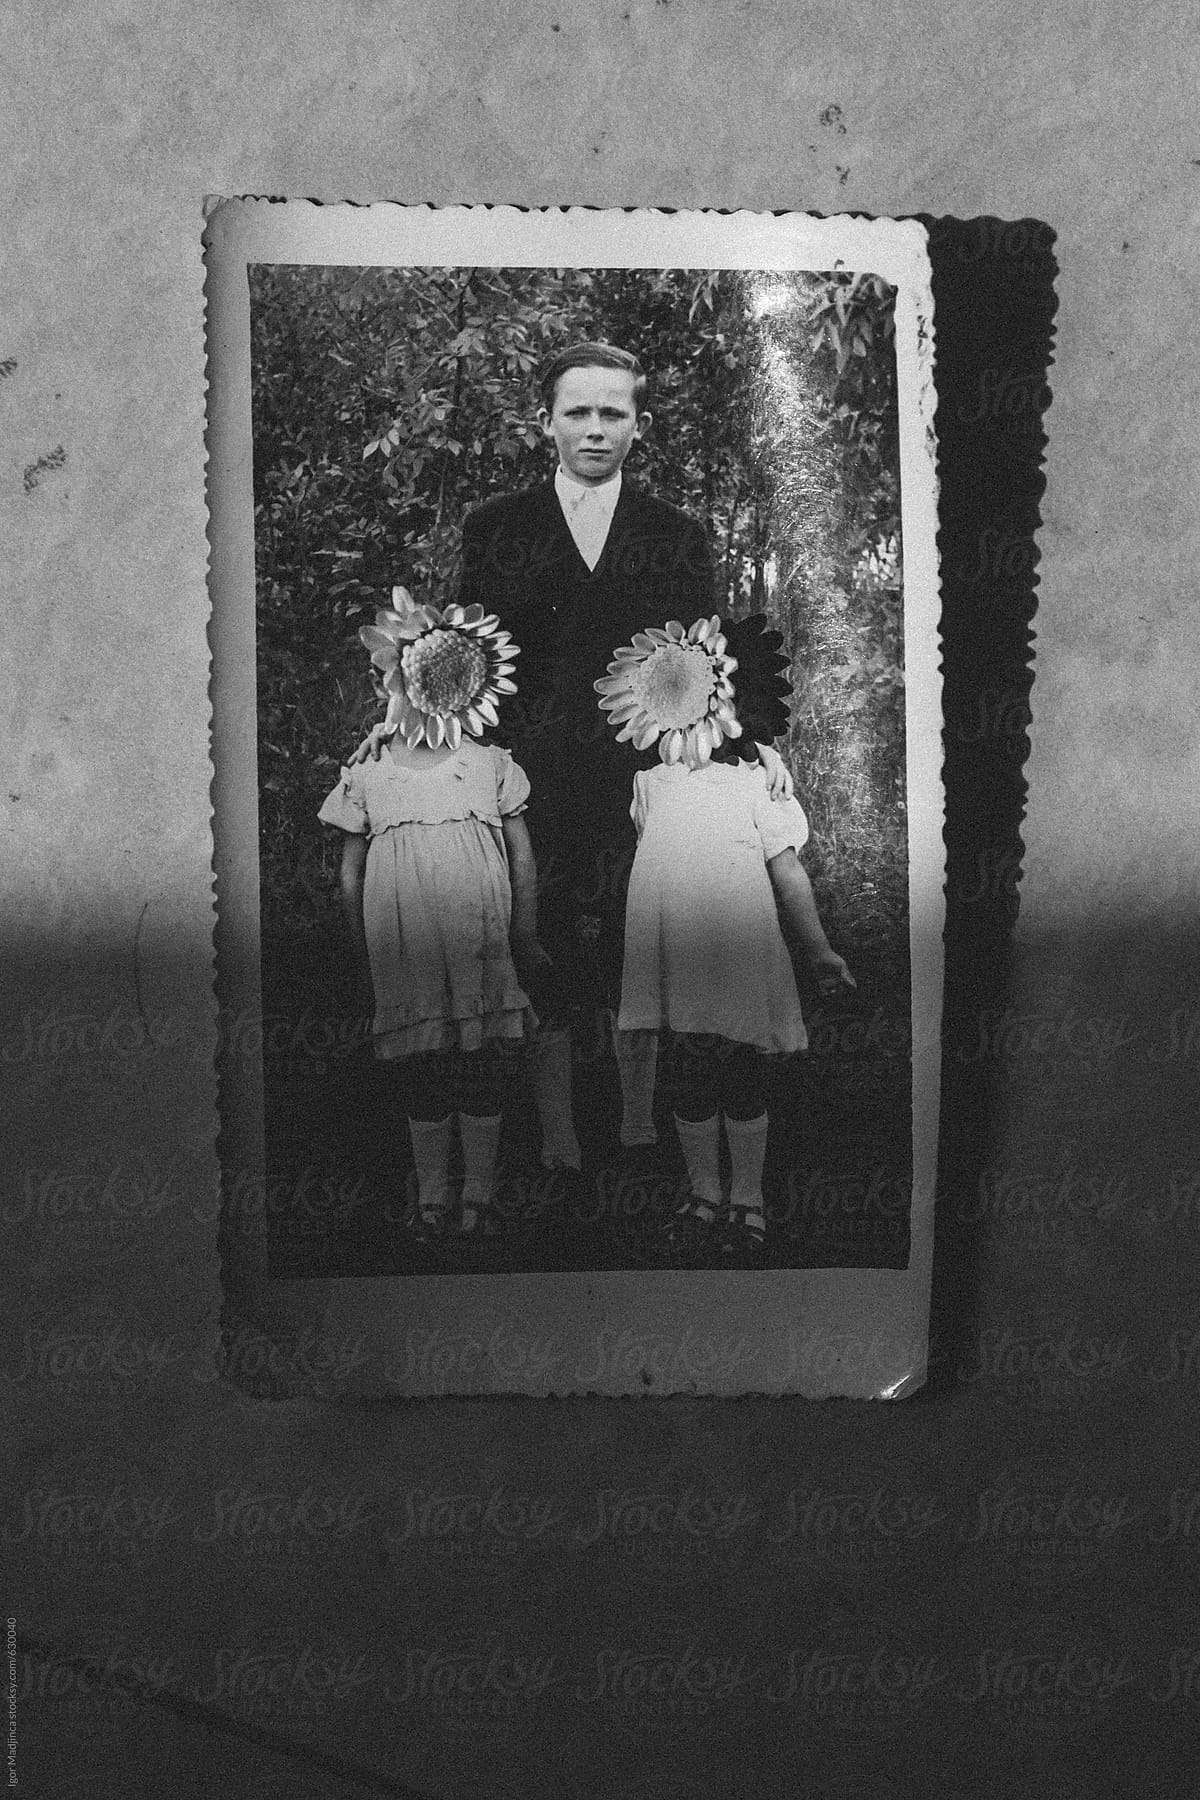 old photo in semi shade, family, children with flowers over their faces, hidden